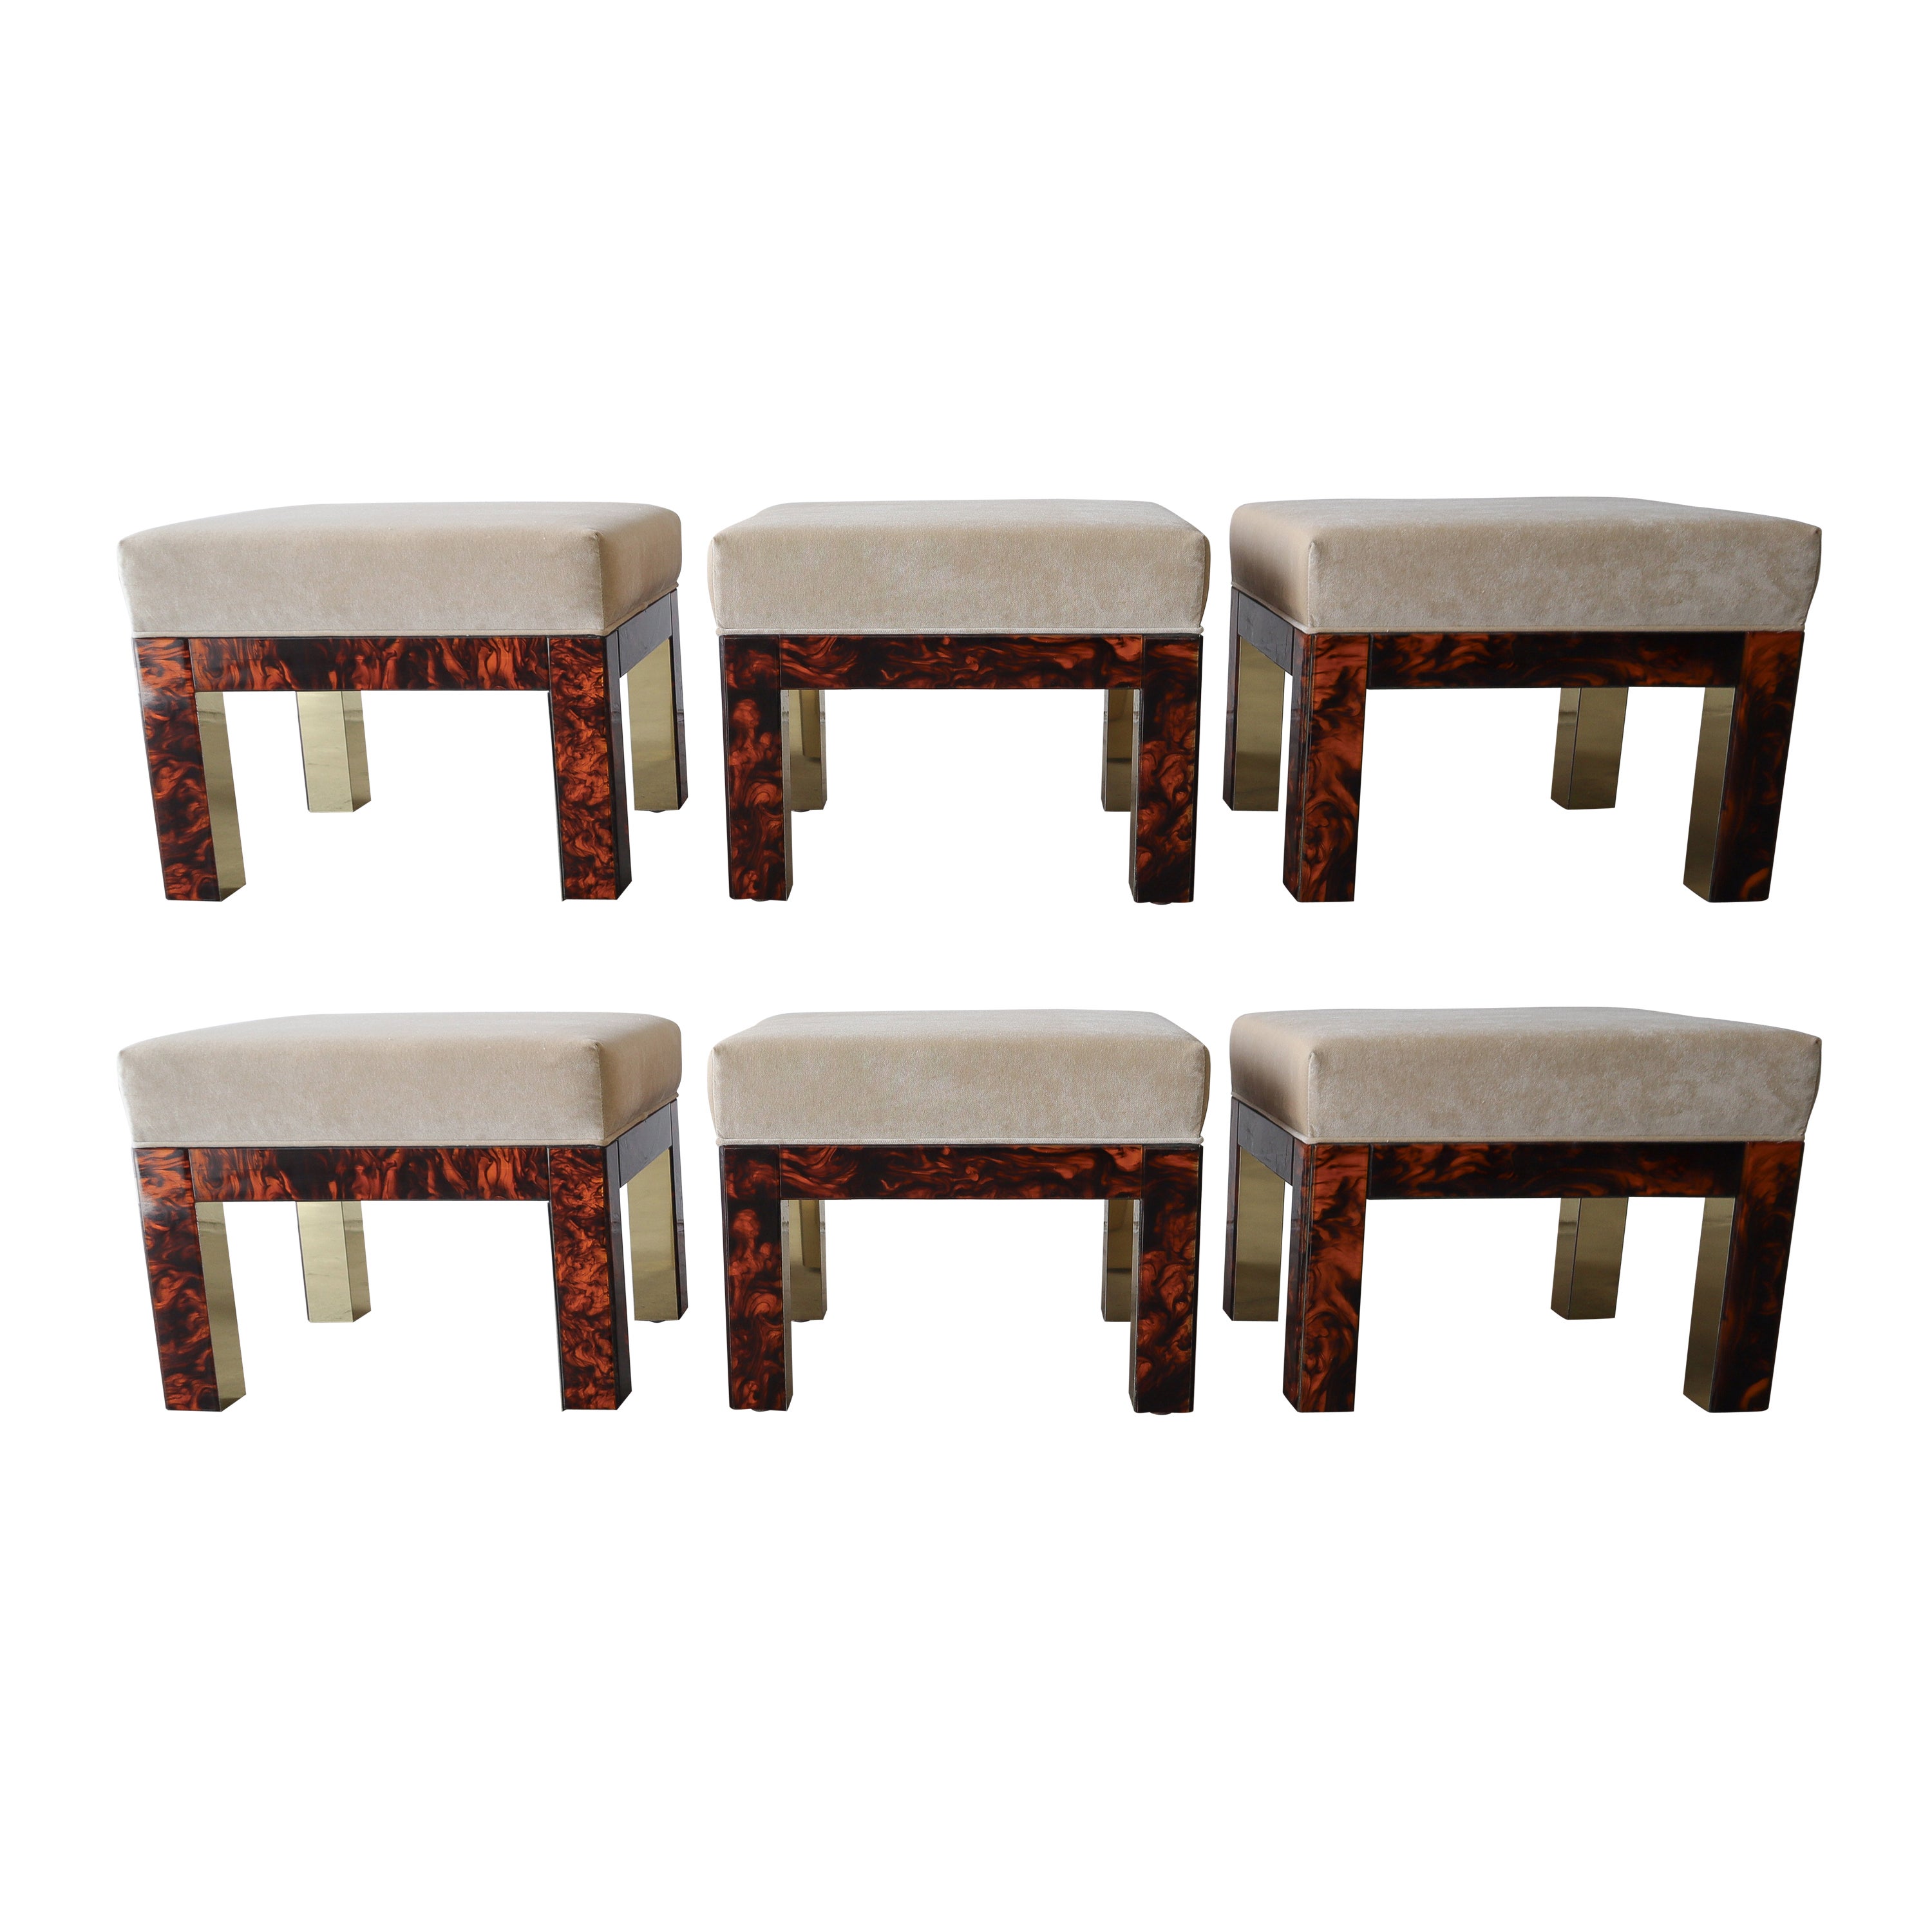 1970s Brass and Bakelite Low Stools Ottomans - Set of 6 For Sale